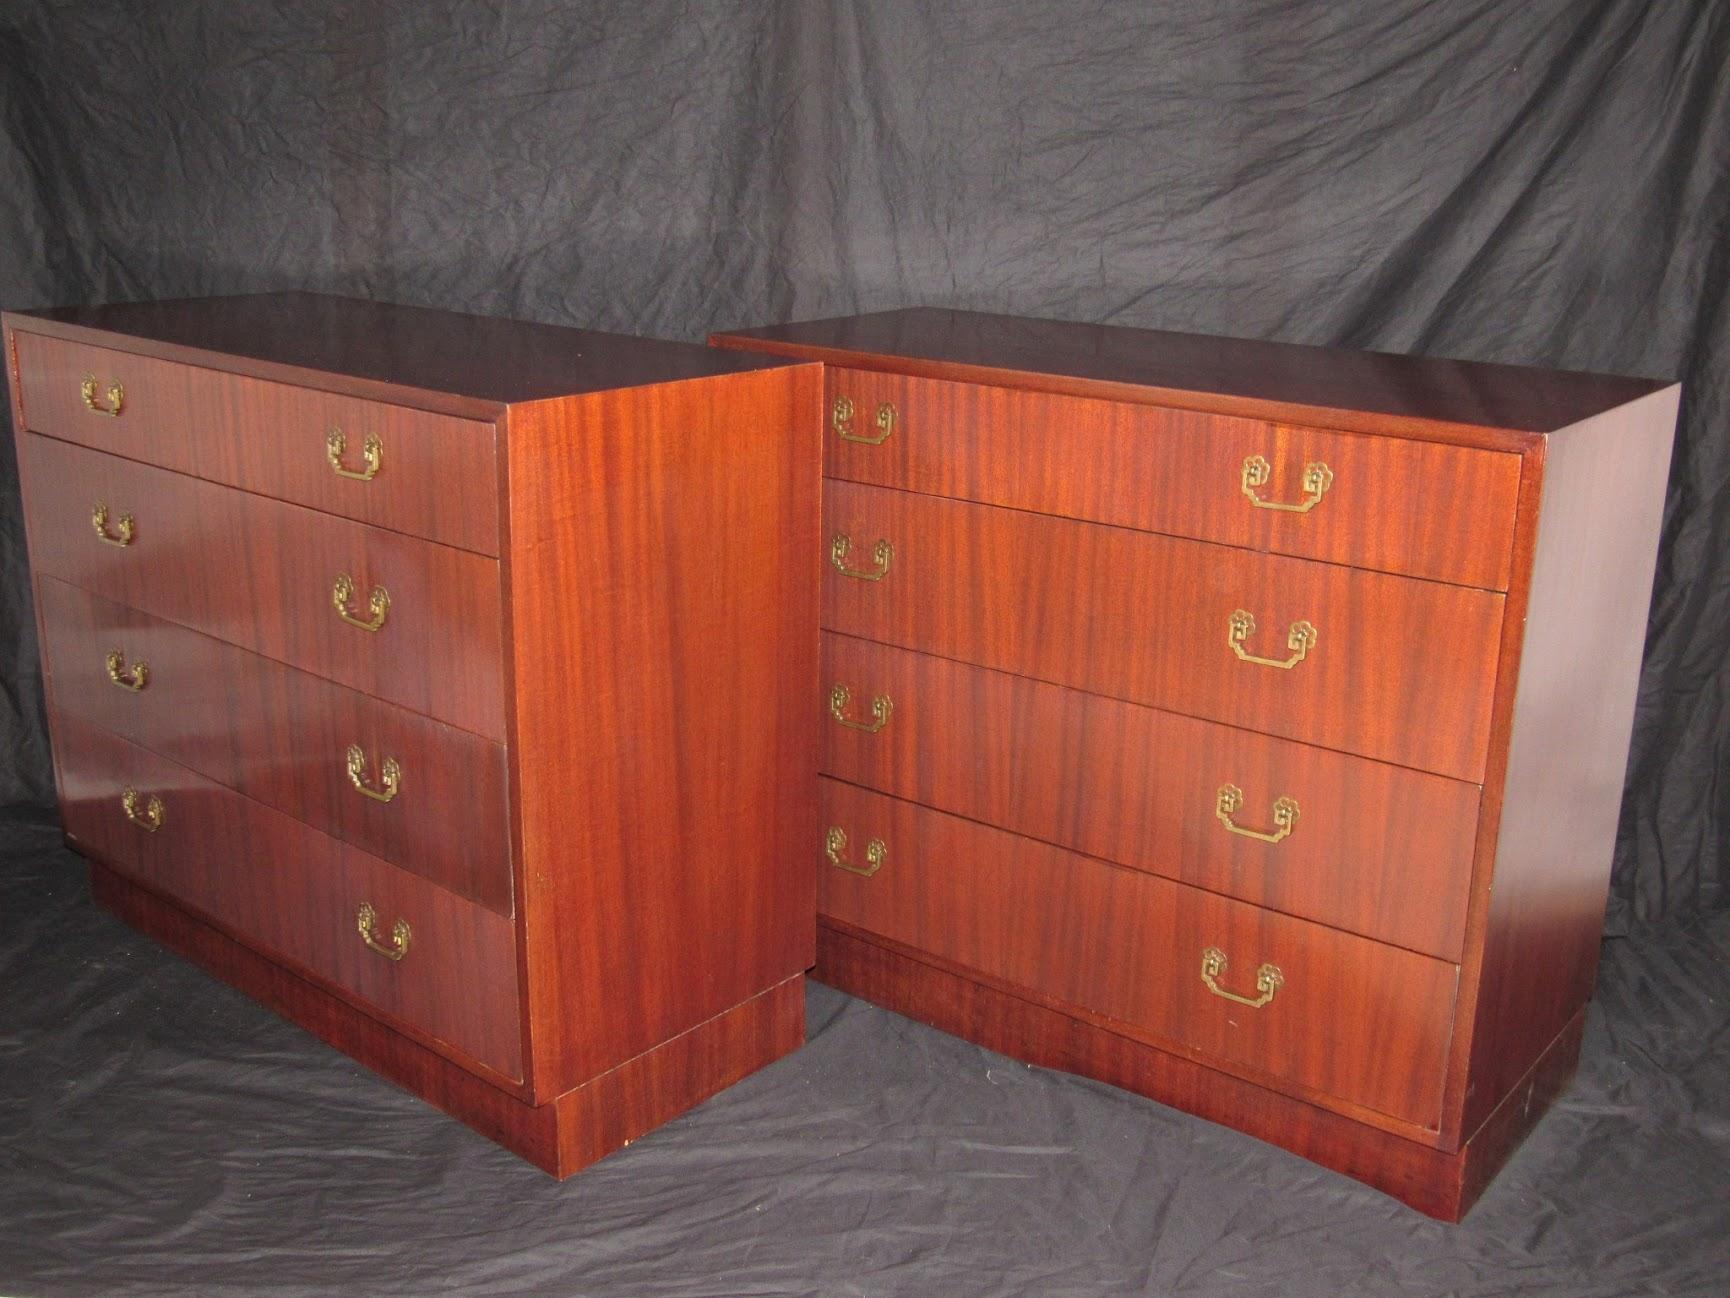 Veneer Mahogany Dressers Four-Drawer Matched Pair, 1940s For Sale